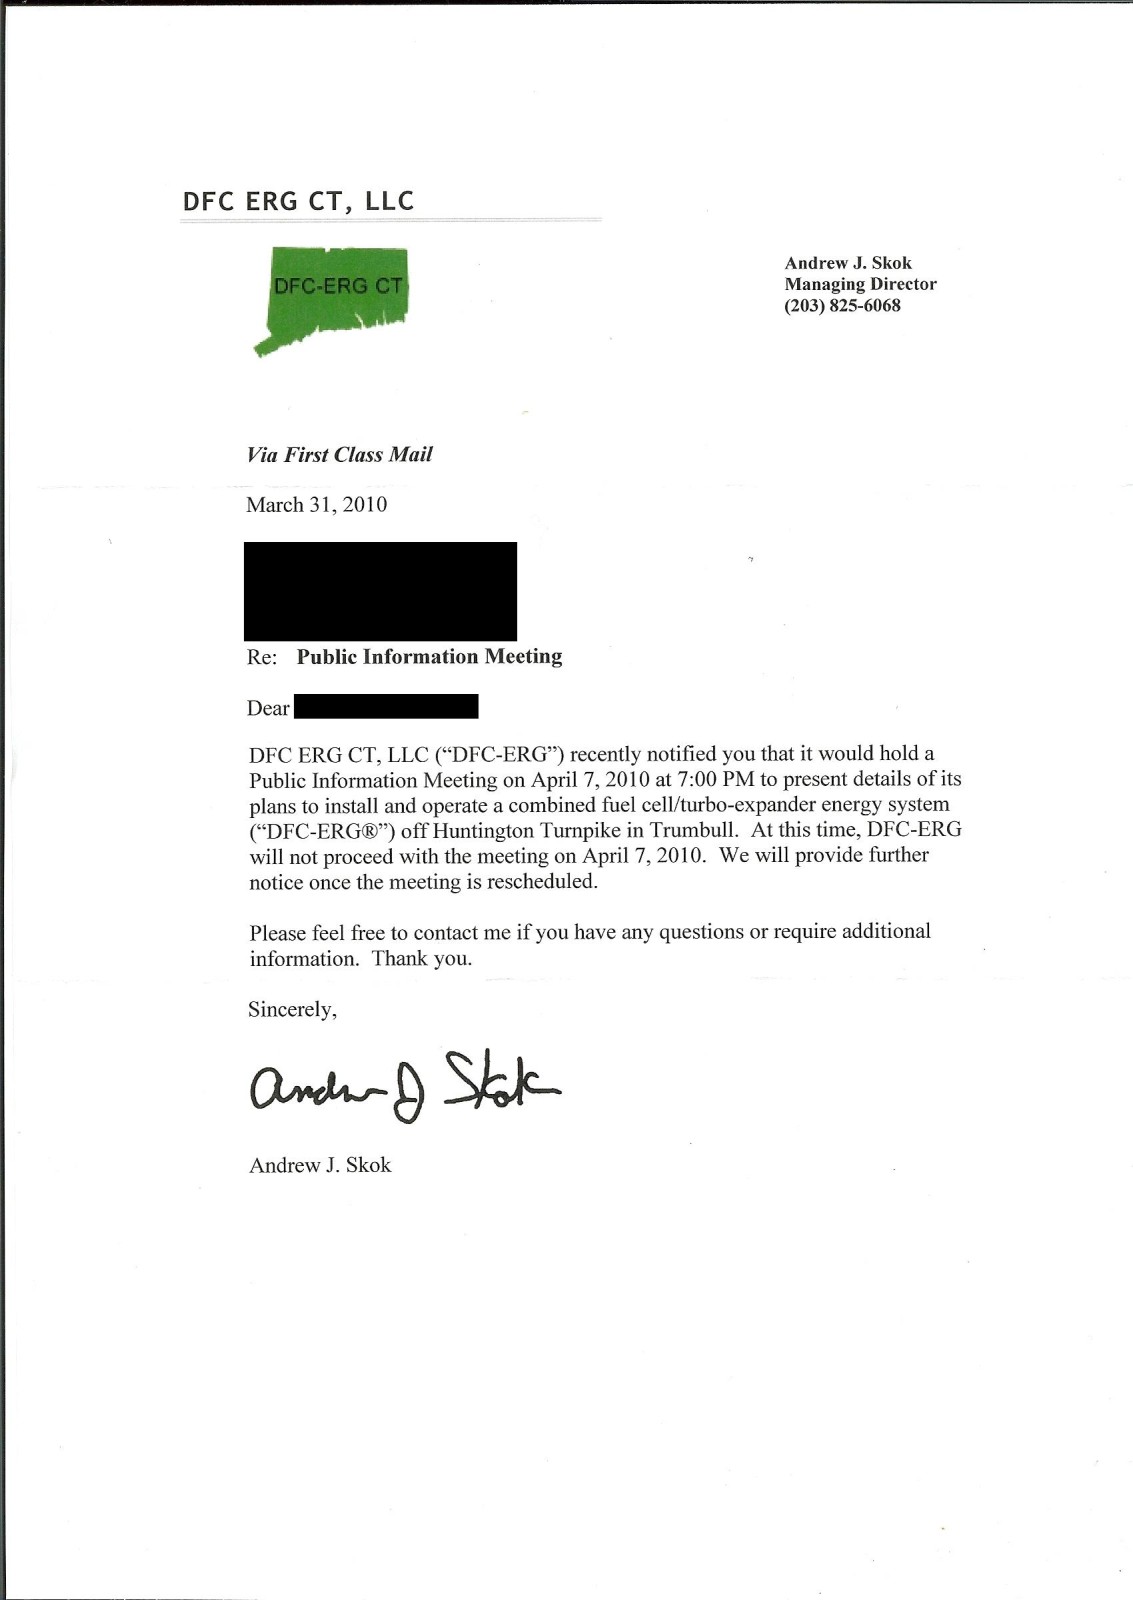 Letter Notifying of a Name Change